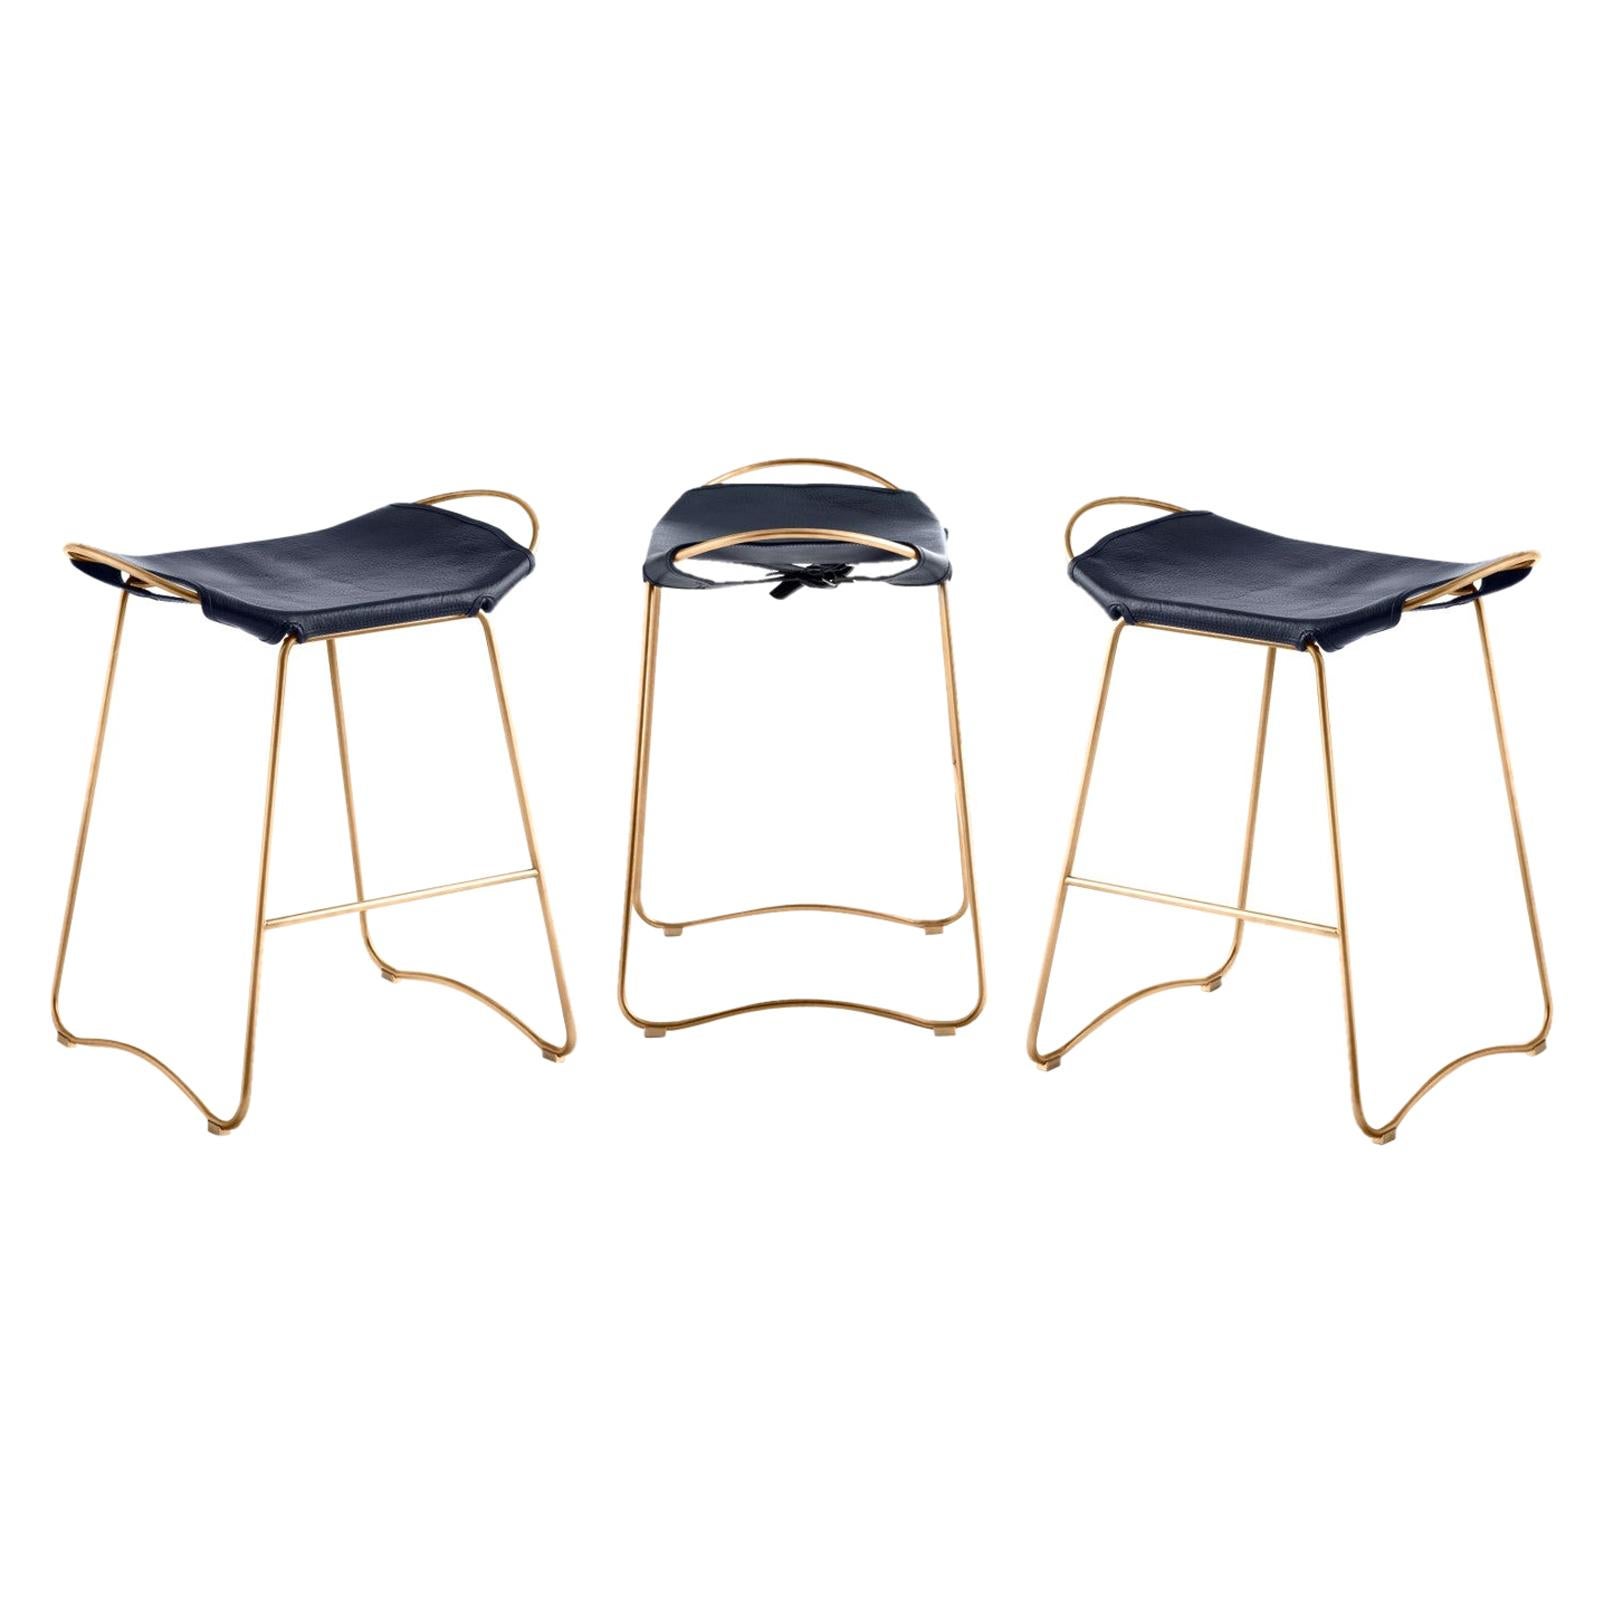 Set of 3 Contemporary Sculptural Bar Stool, Aged Brass Metal & Navy Blue Leather For Sale